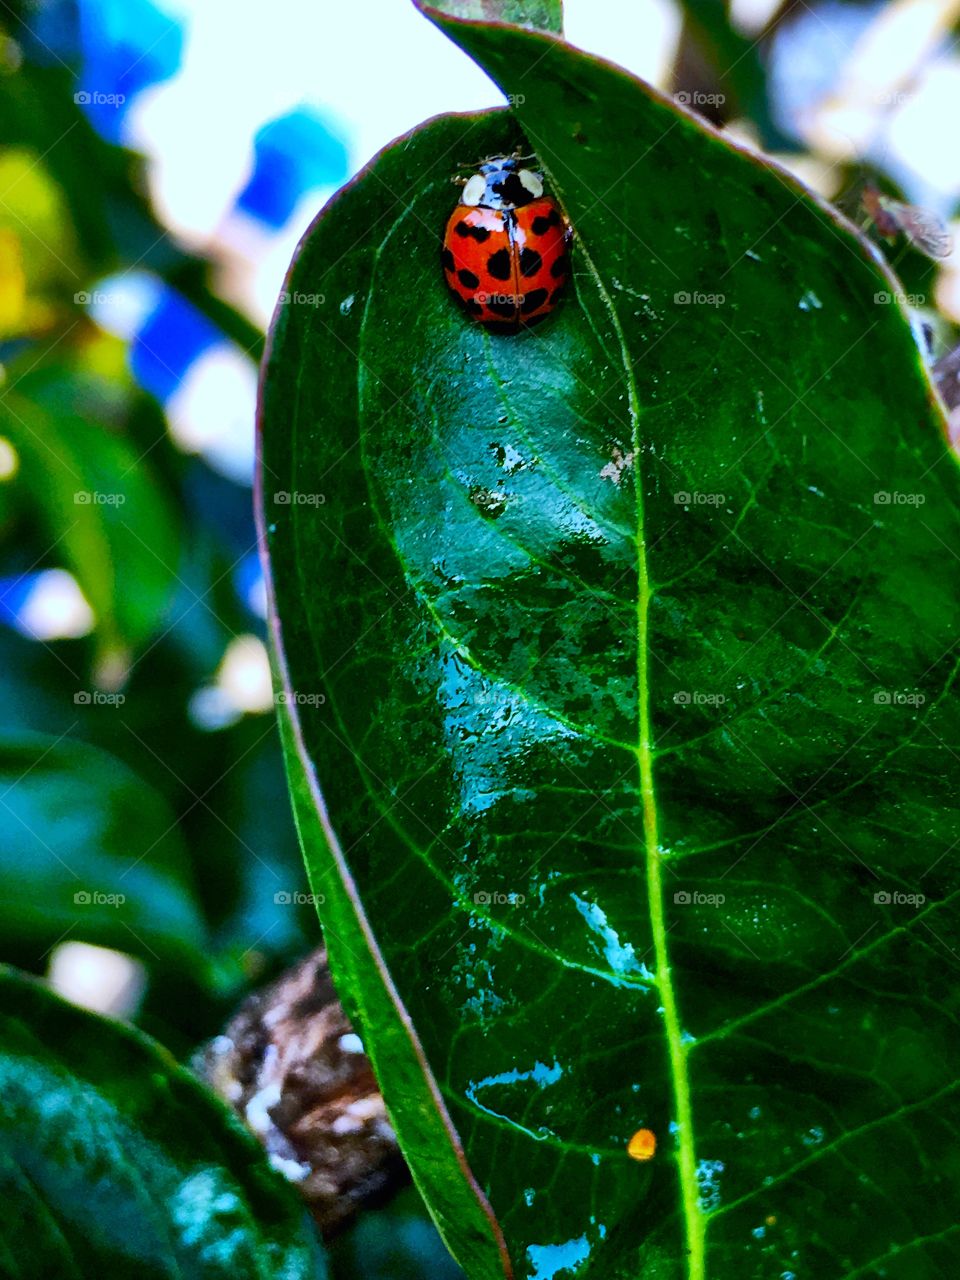 Lady bug becomes a hidden garden jewel as it is found napping 